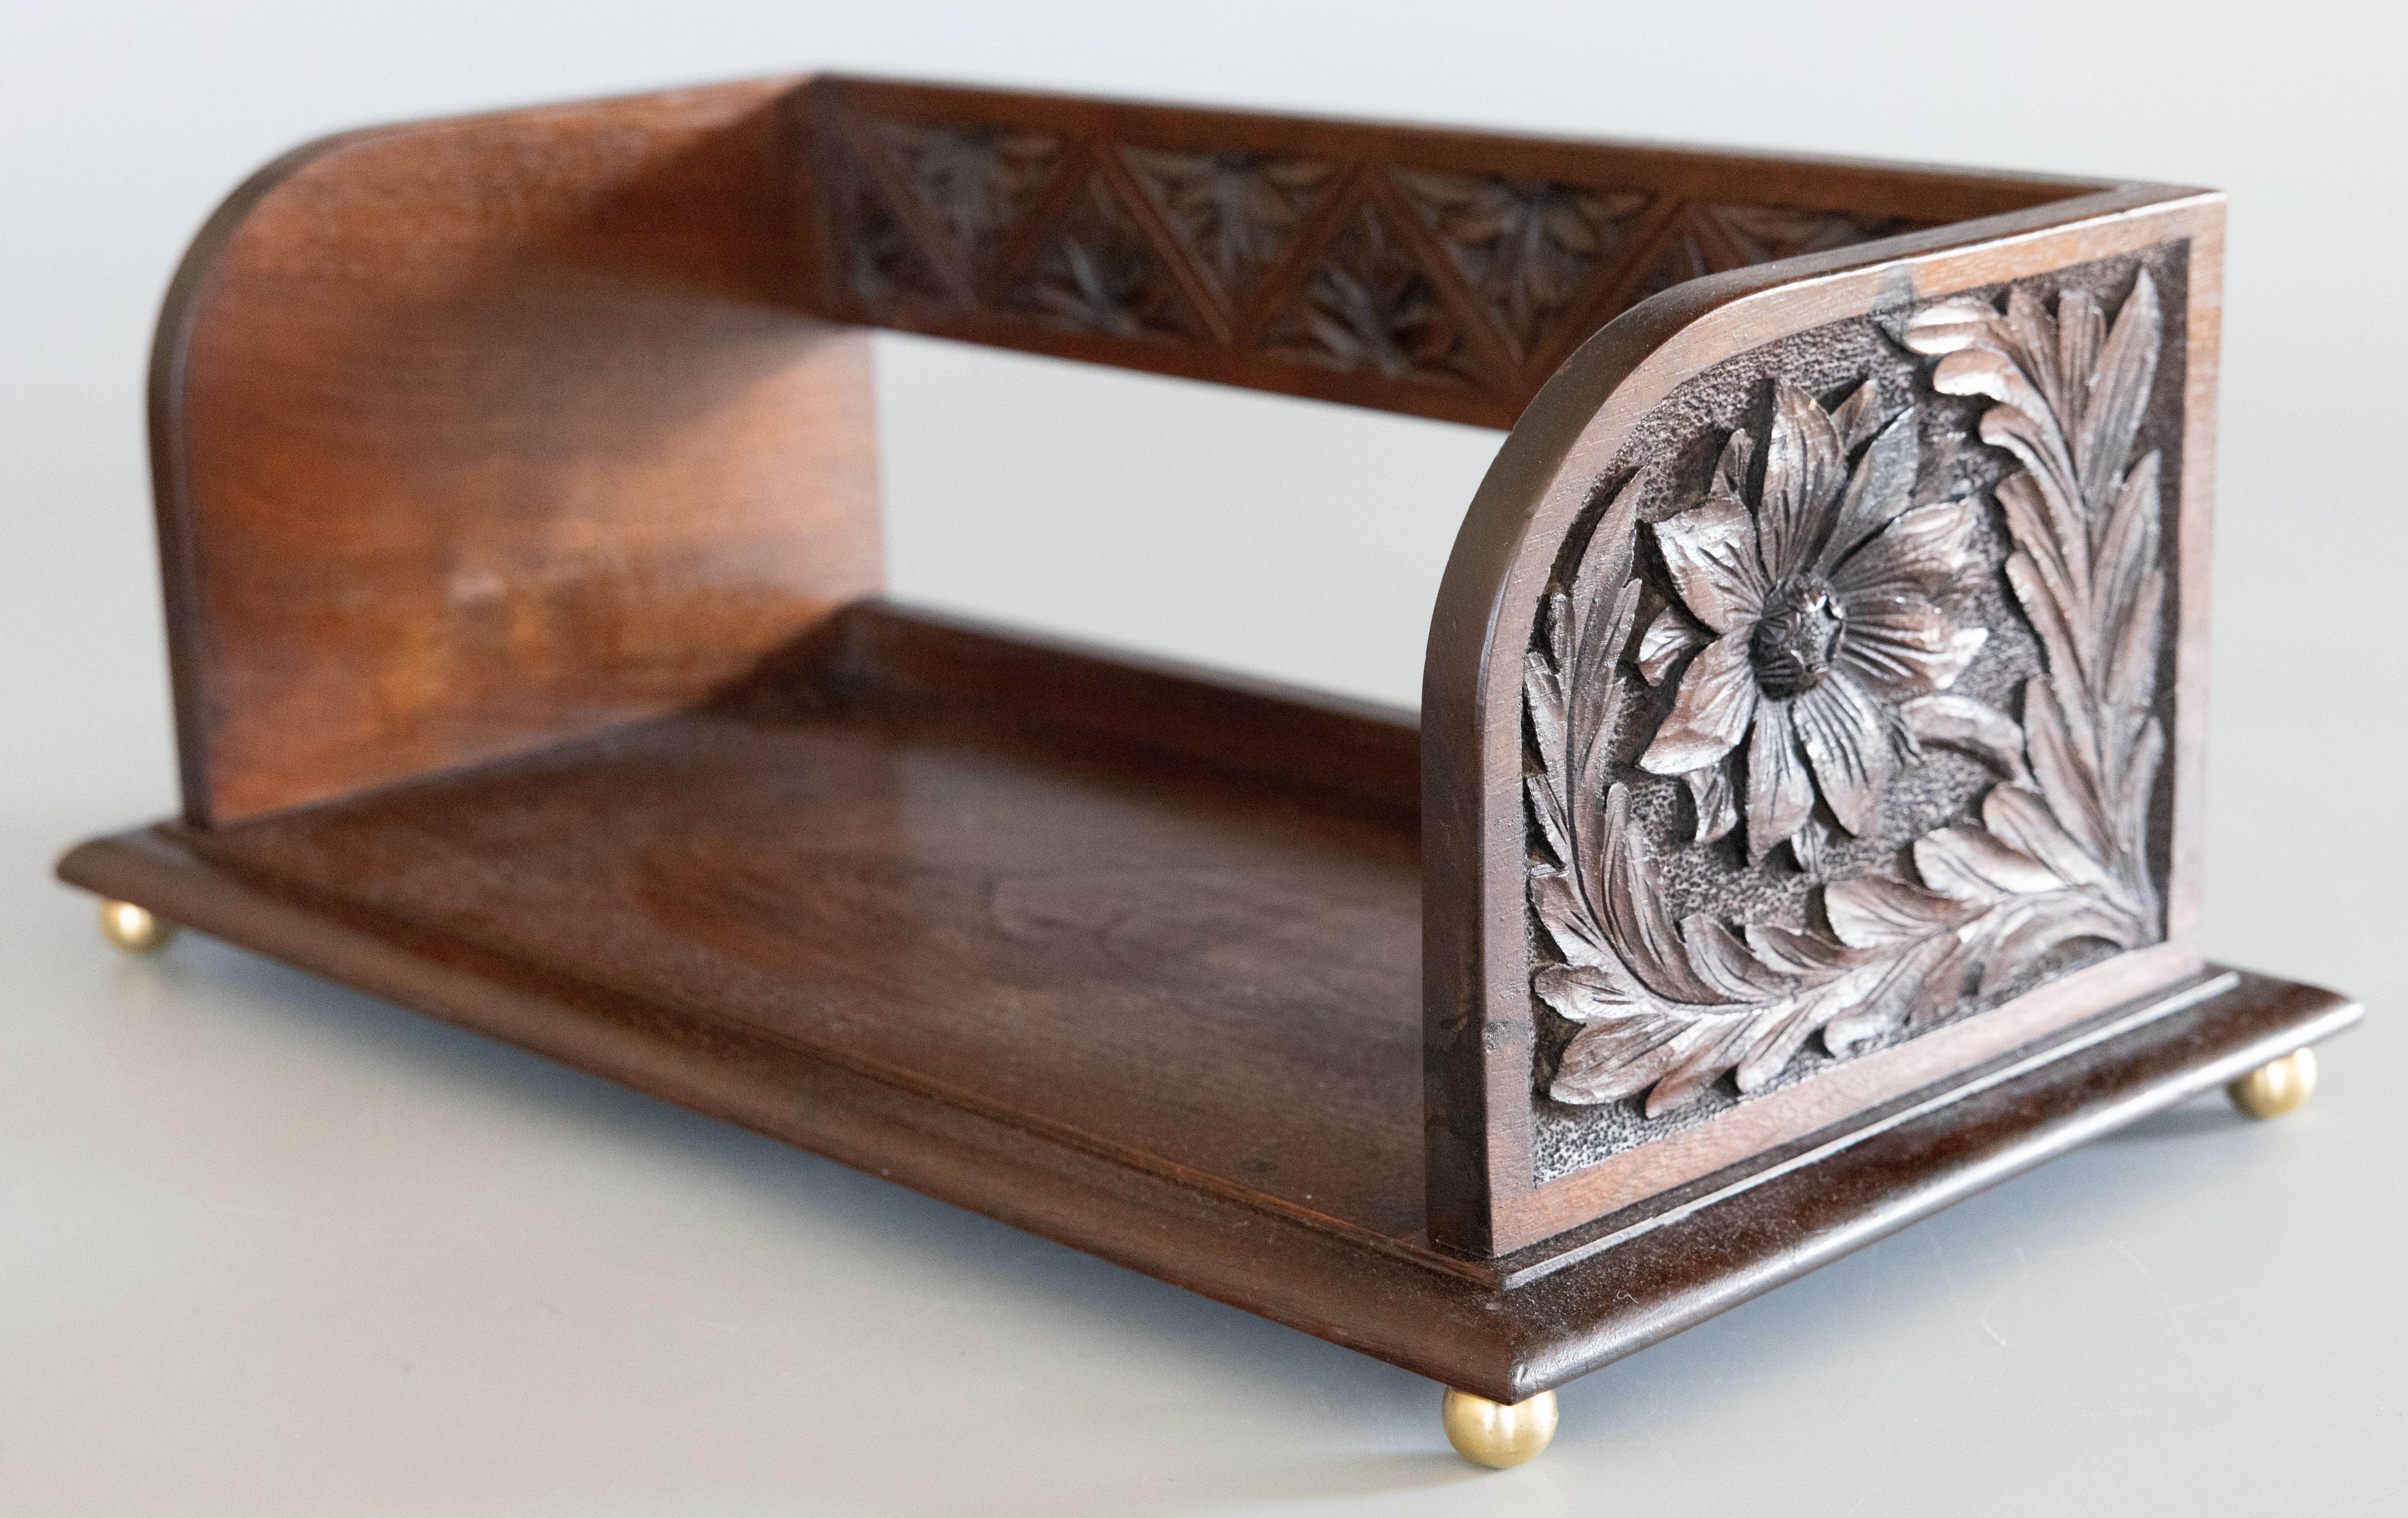 English Carved Mahogany Table Top Book Trough Rack Stand Bookends, C. 1900 For Sale 1